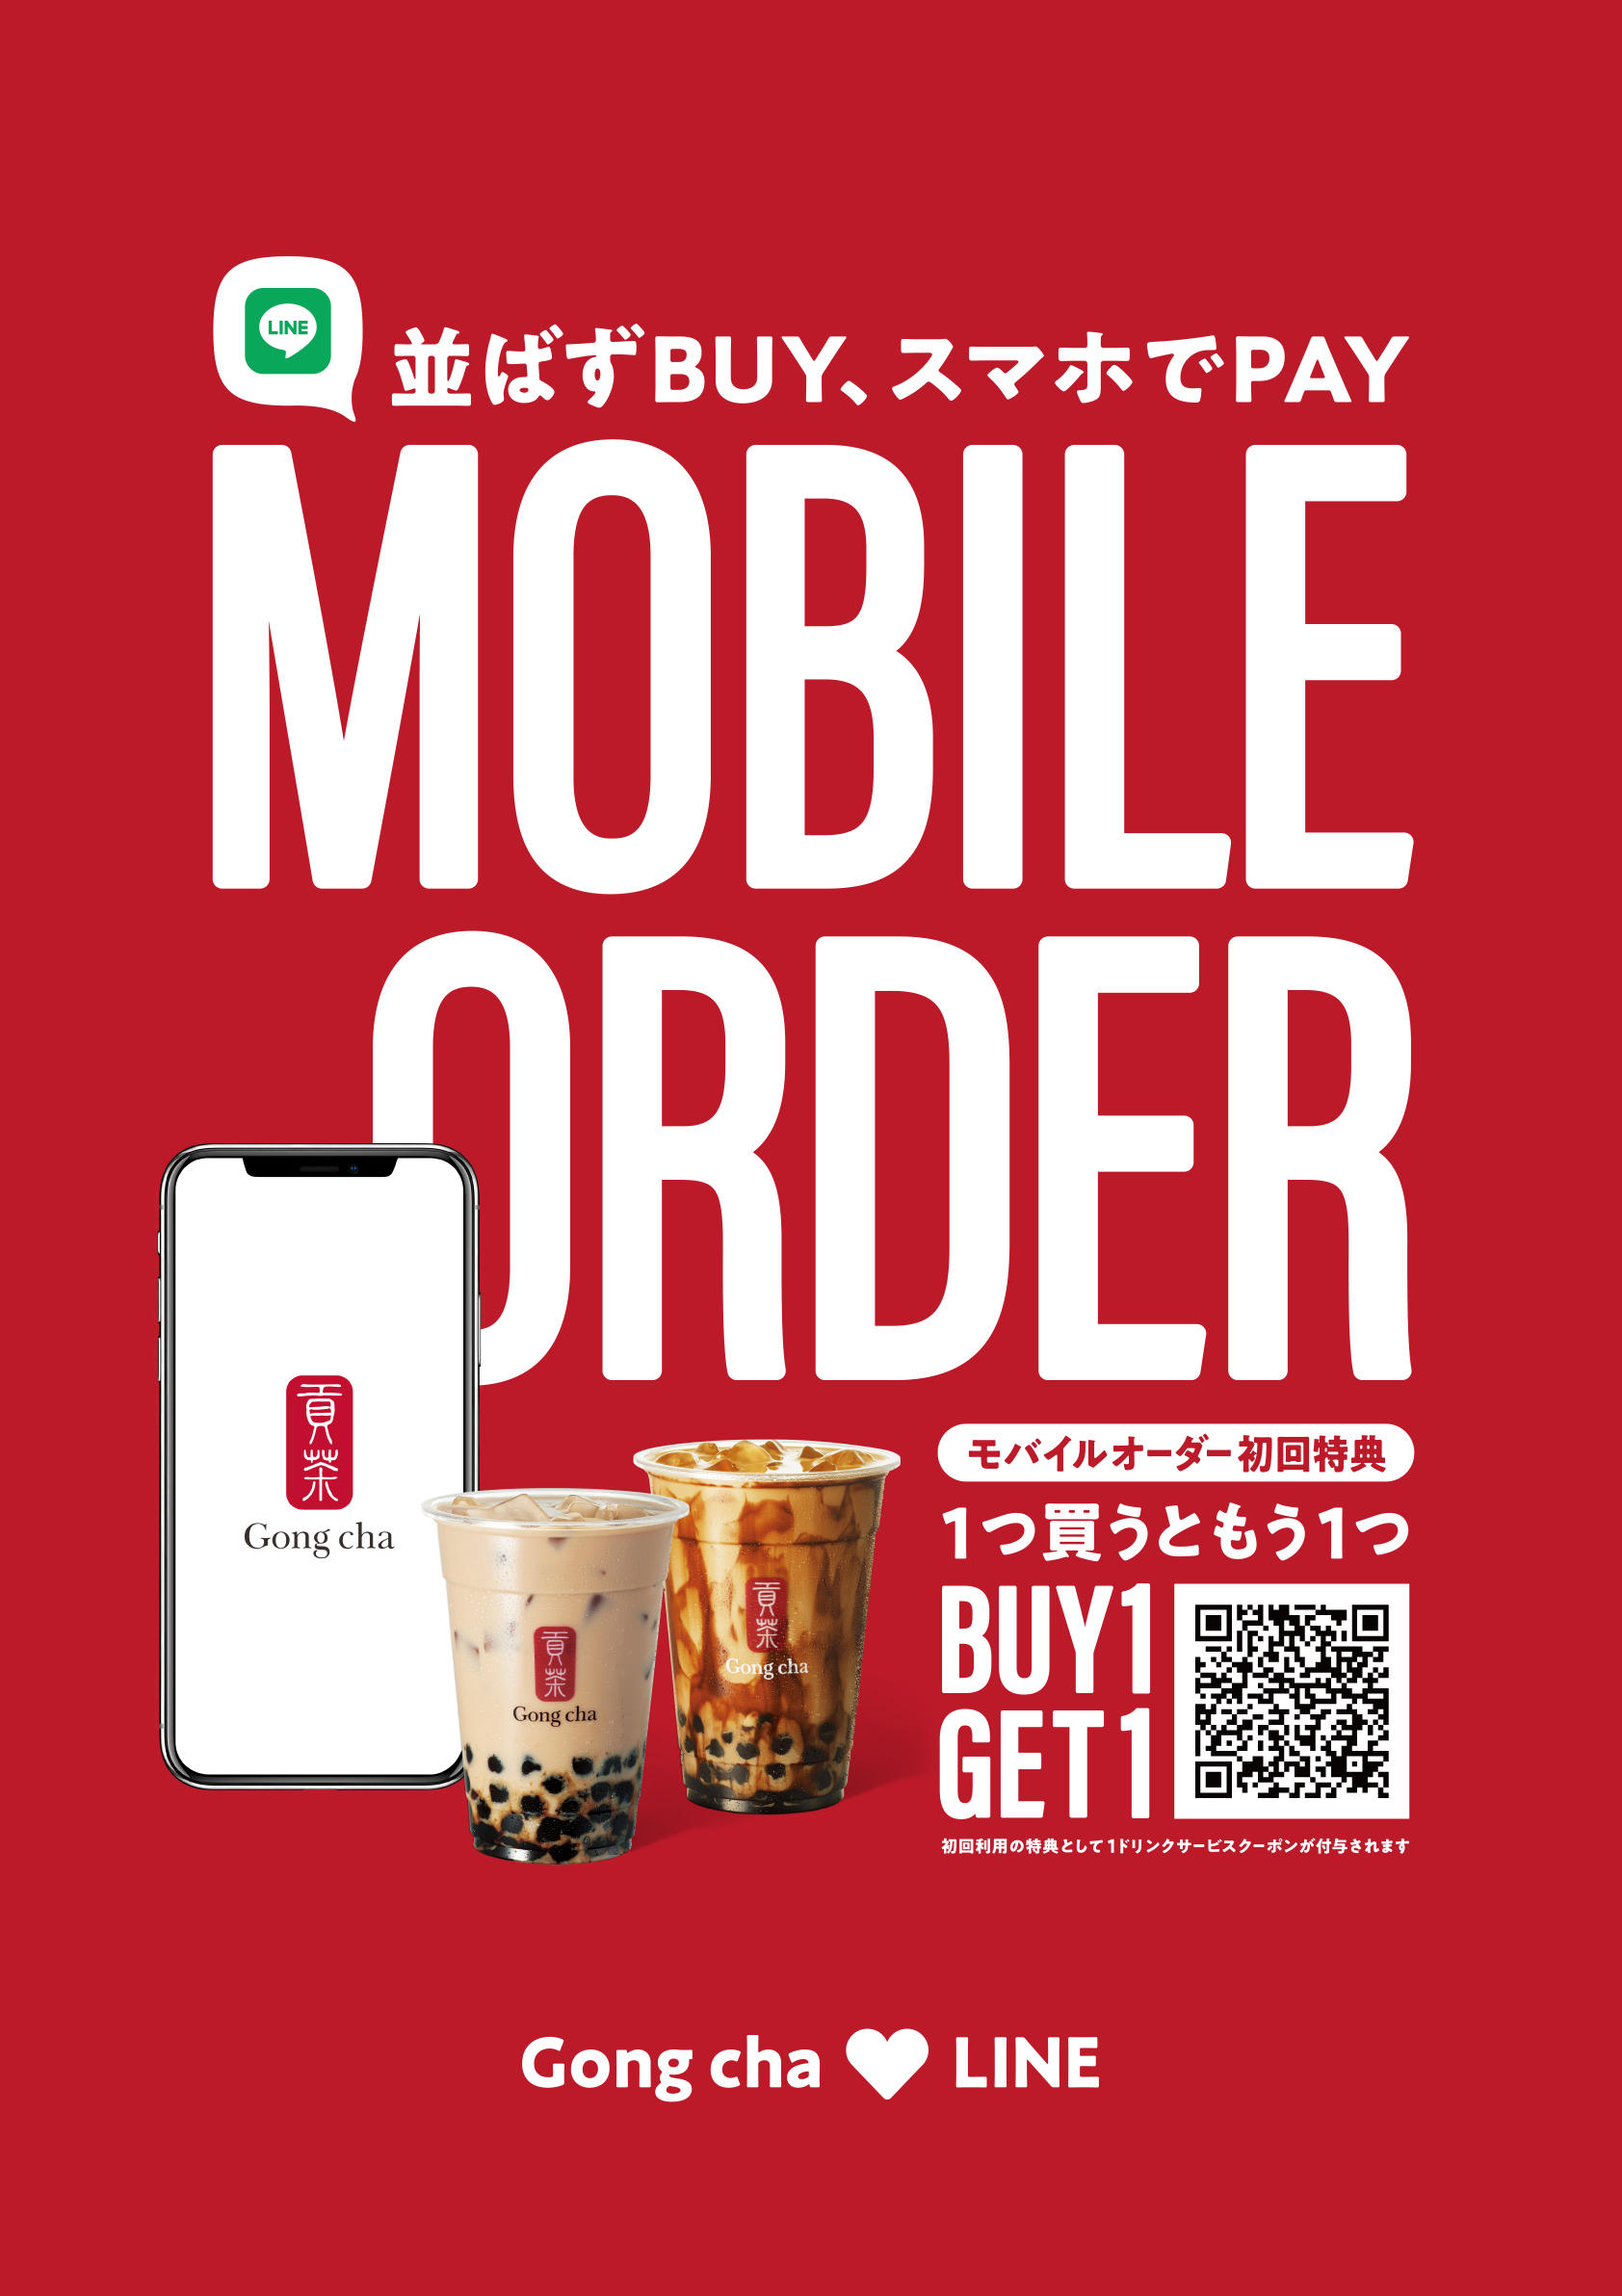 Please tell us the background behind the introduction of mobile ordering.